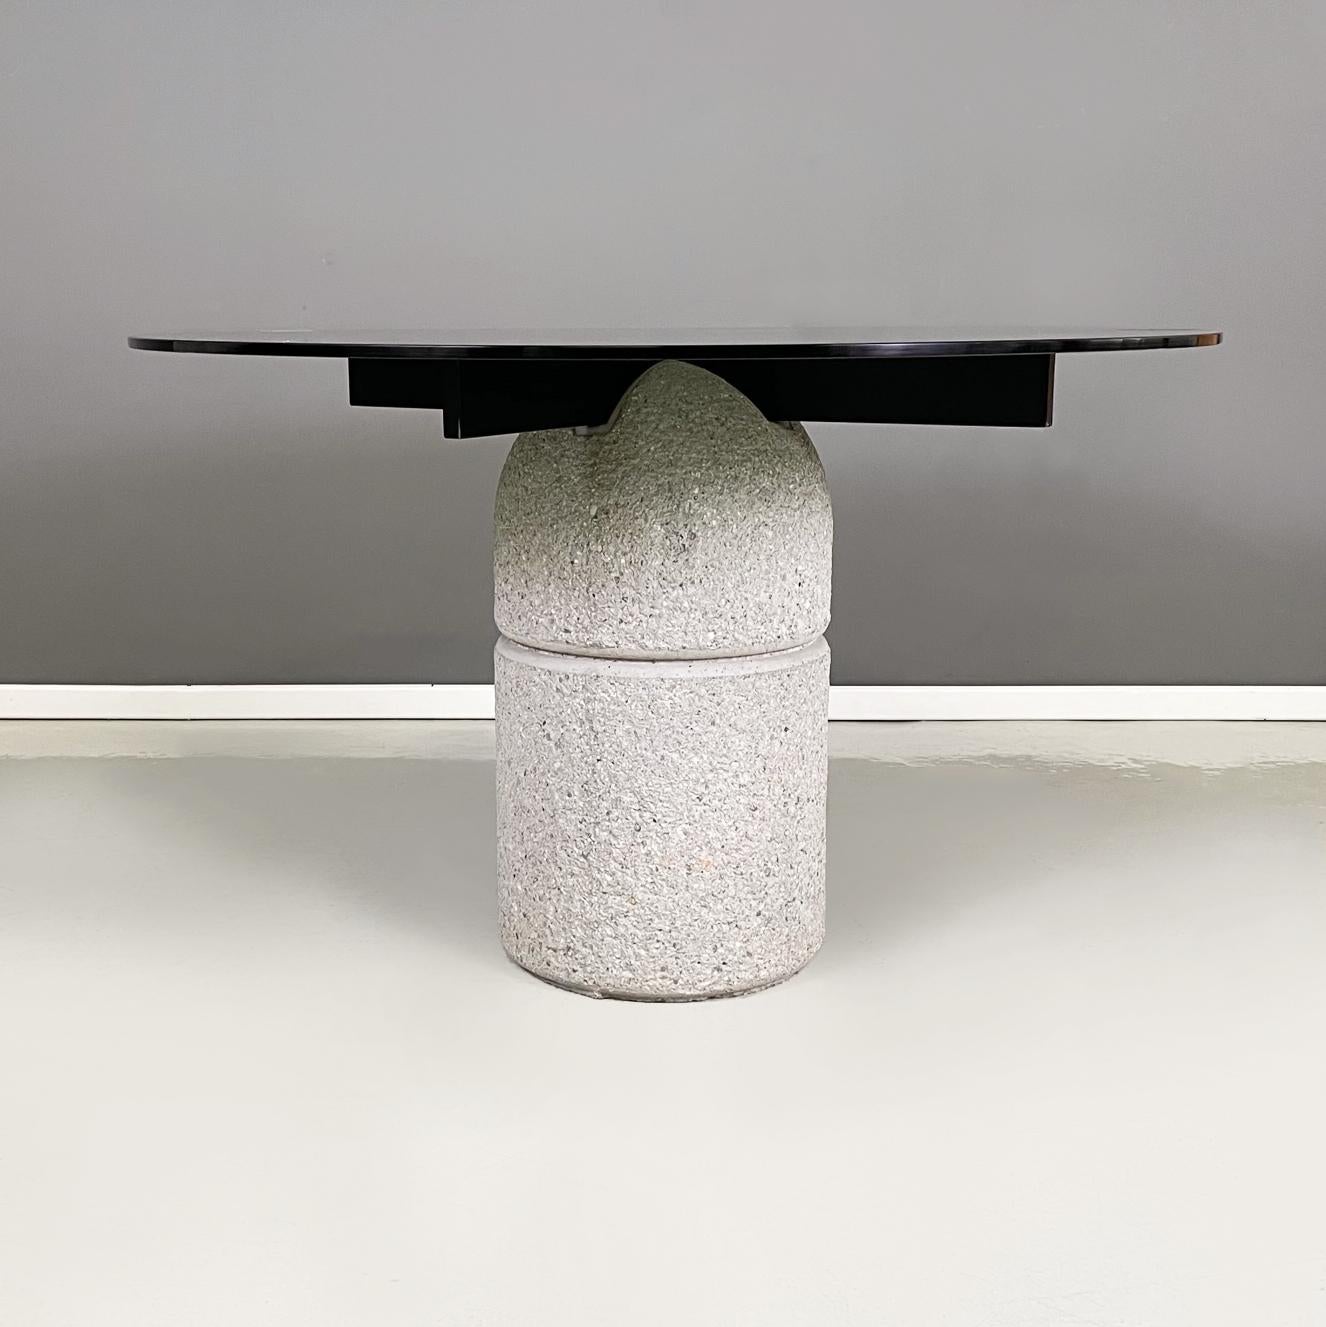 Italian modern Dining table Paracarro by Giovanni Offredi for Saporiti Italia, 1970s
Dining table mod. Paracarro with round top in smoked glass. The structure that supports the top is made up of a black painted metal cross, set in a concrete